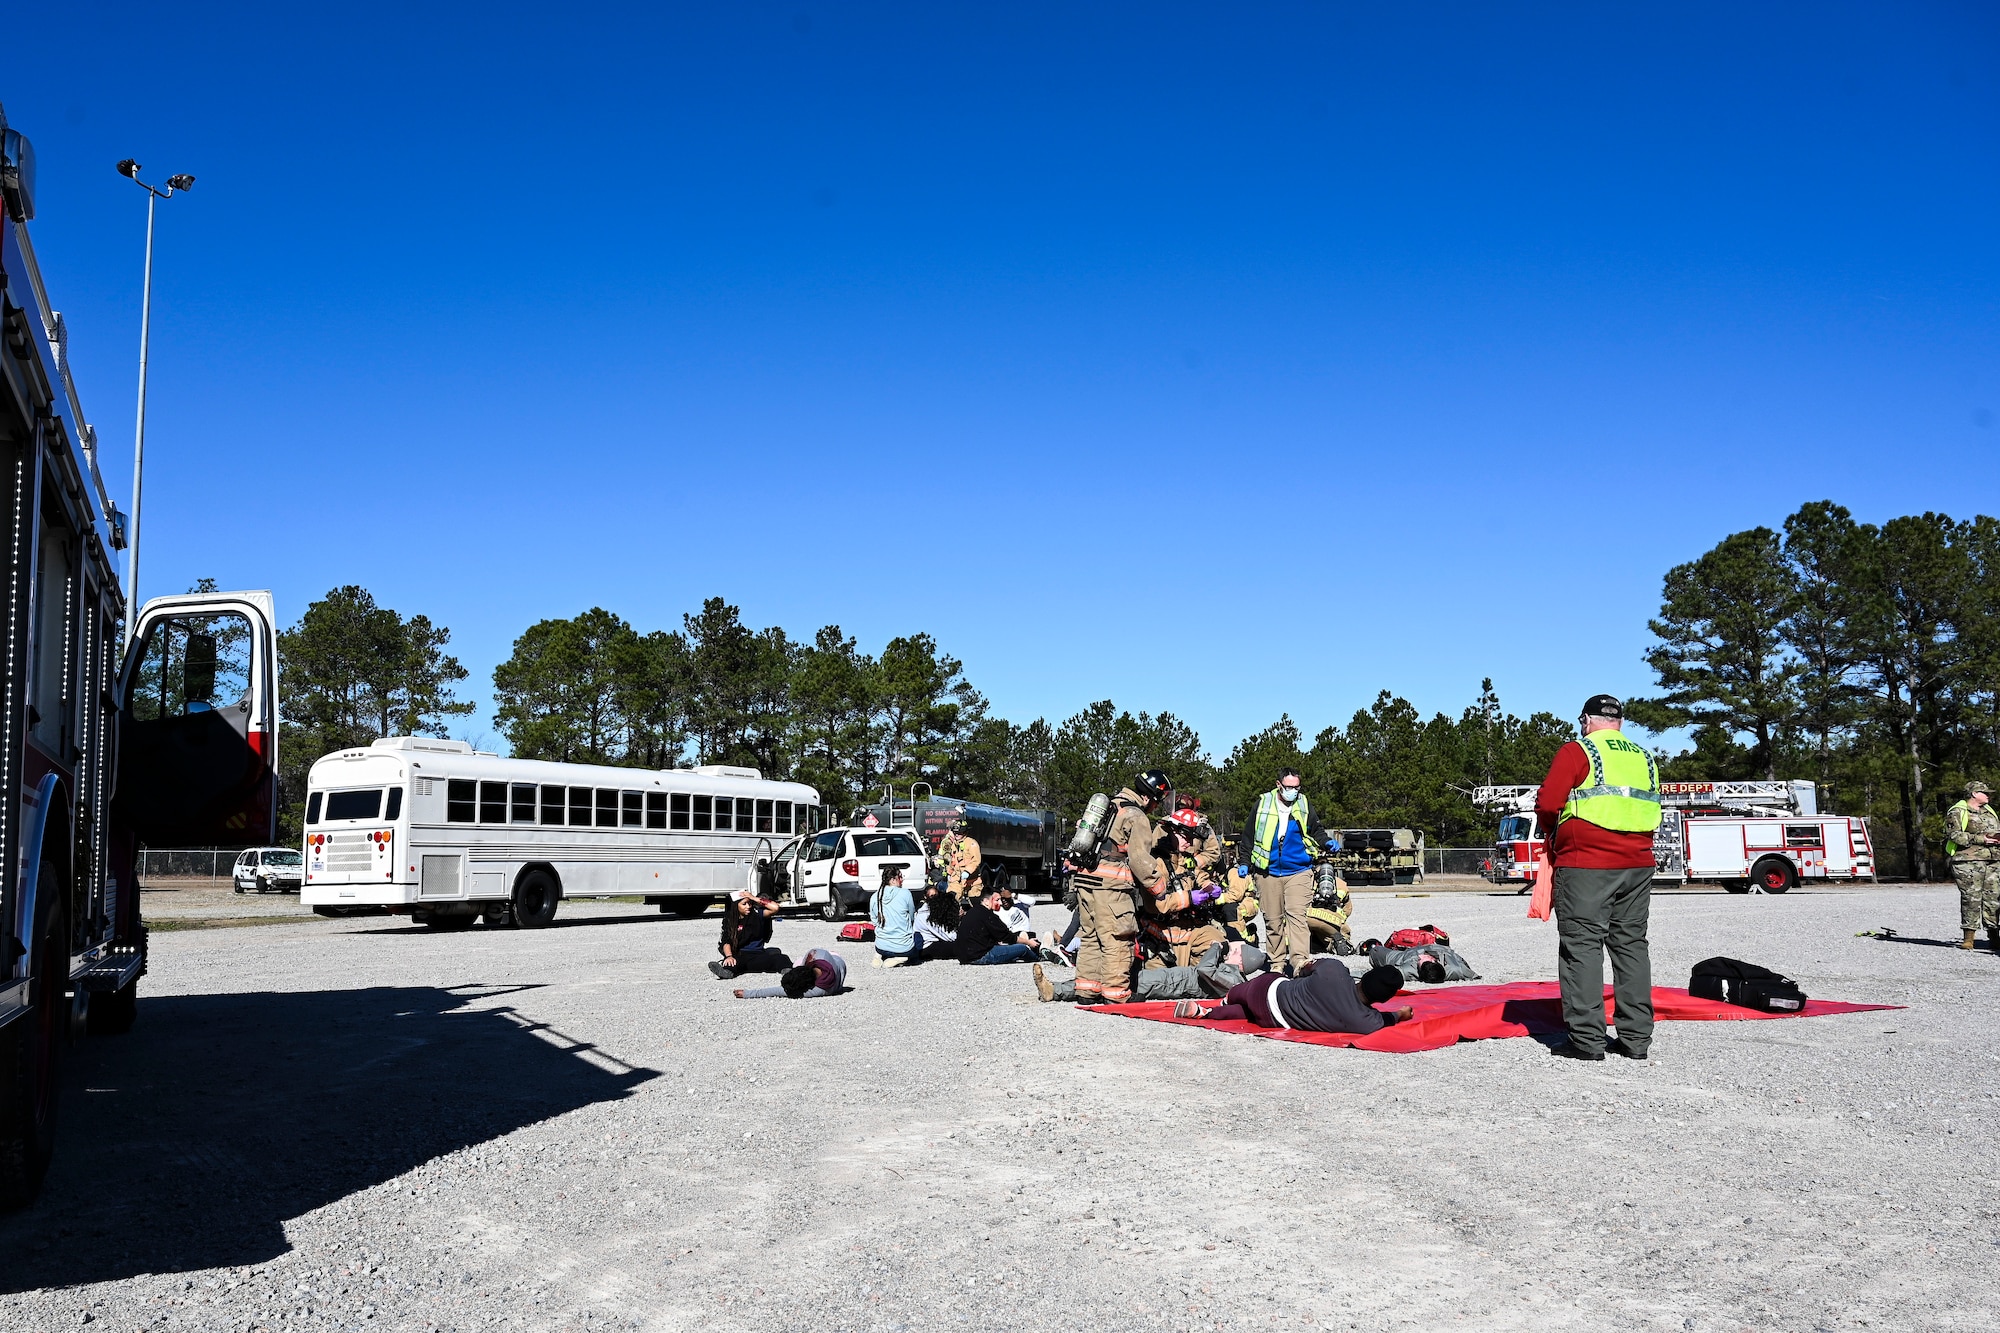 Emergency response personnel perform triage on injured volunteers during a mass casualty training exercise at Shaw Air Force Base, South Carolina, Jan. 19, 2022. The two-day exercise was designed to test and enhance the capabilities of multiple emergency response personnel. (U.S. Air Force photo by Senior Airman Madeline Herzog)